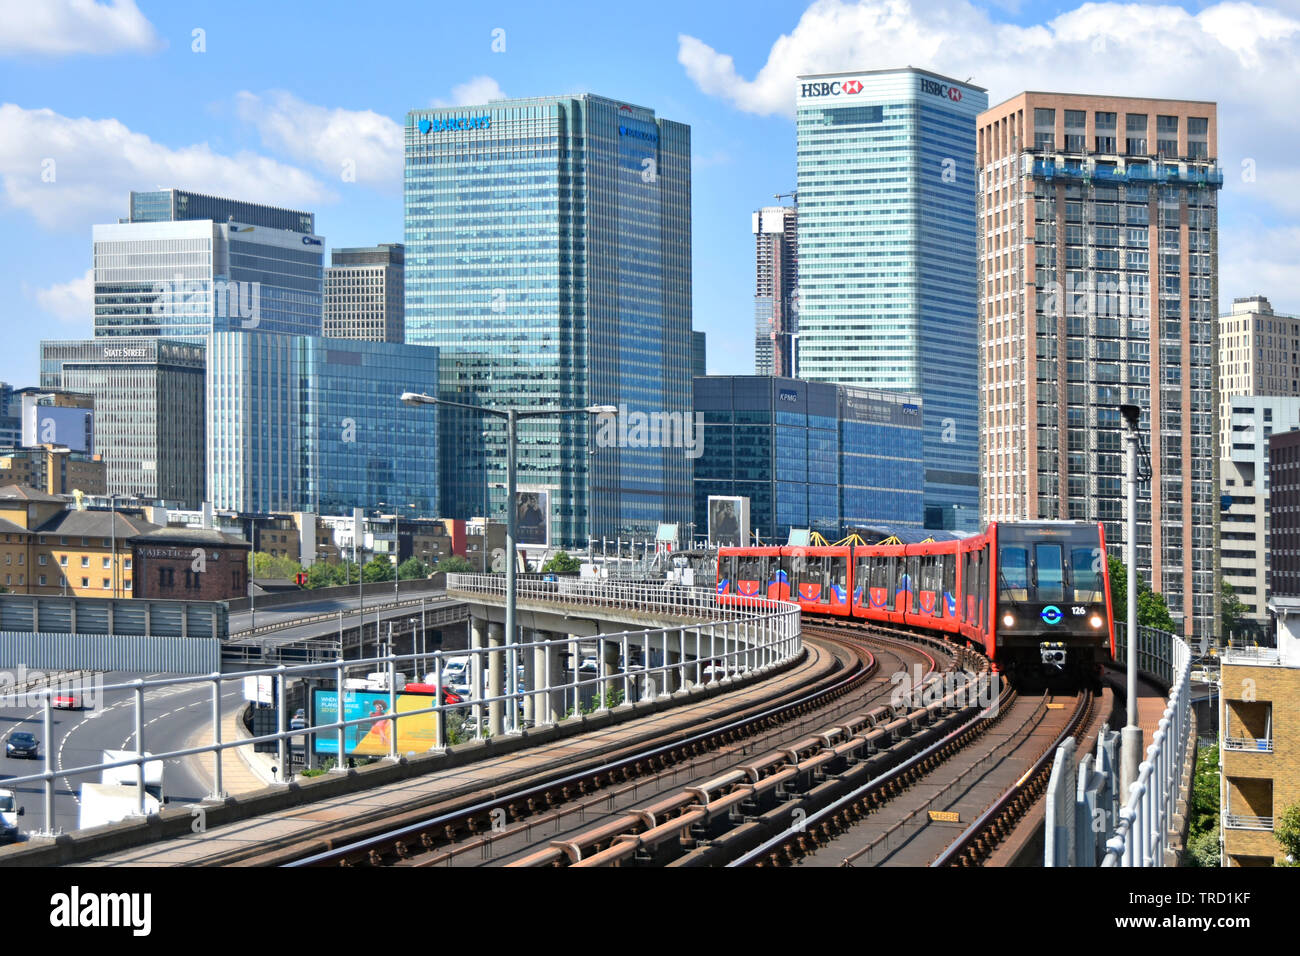 East London urban landscape inTower Hamlets with building development at Canary Wharf banking business offices & public passenger transport railway UK Stock Photo